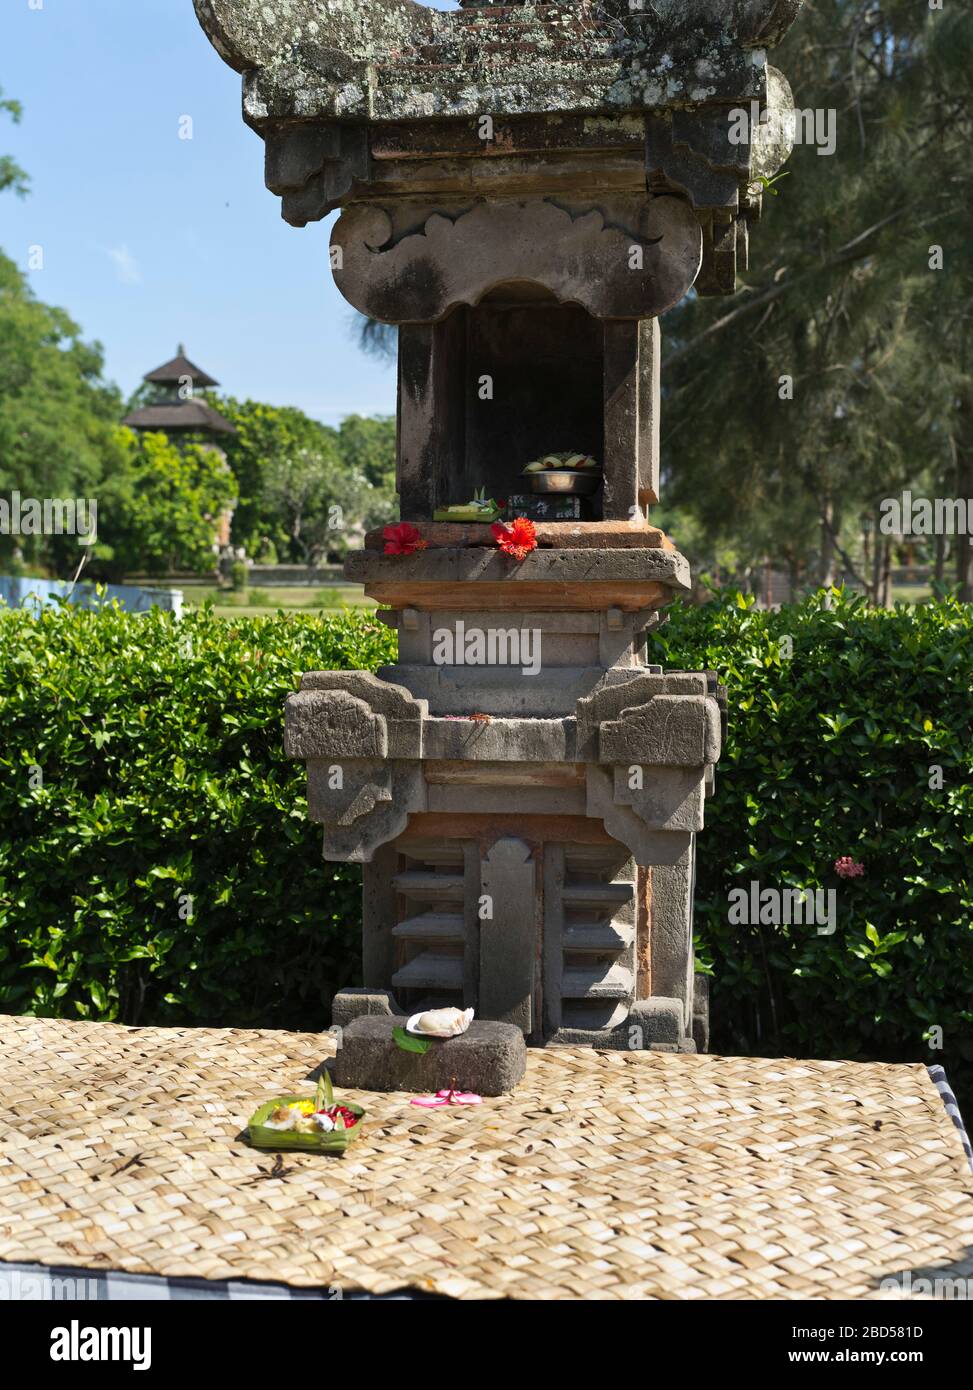 dh Pura Taman Ayun Royal Temple BALI INDONESIA Balinese traditional temples offerings to gods shrine offering hindu ritual food gifts offers Stock Photo